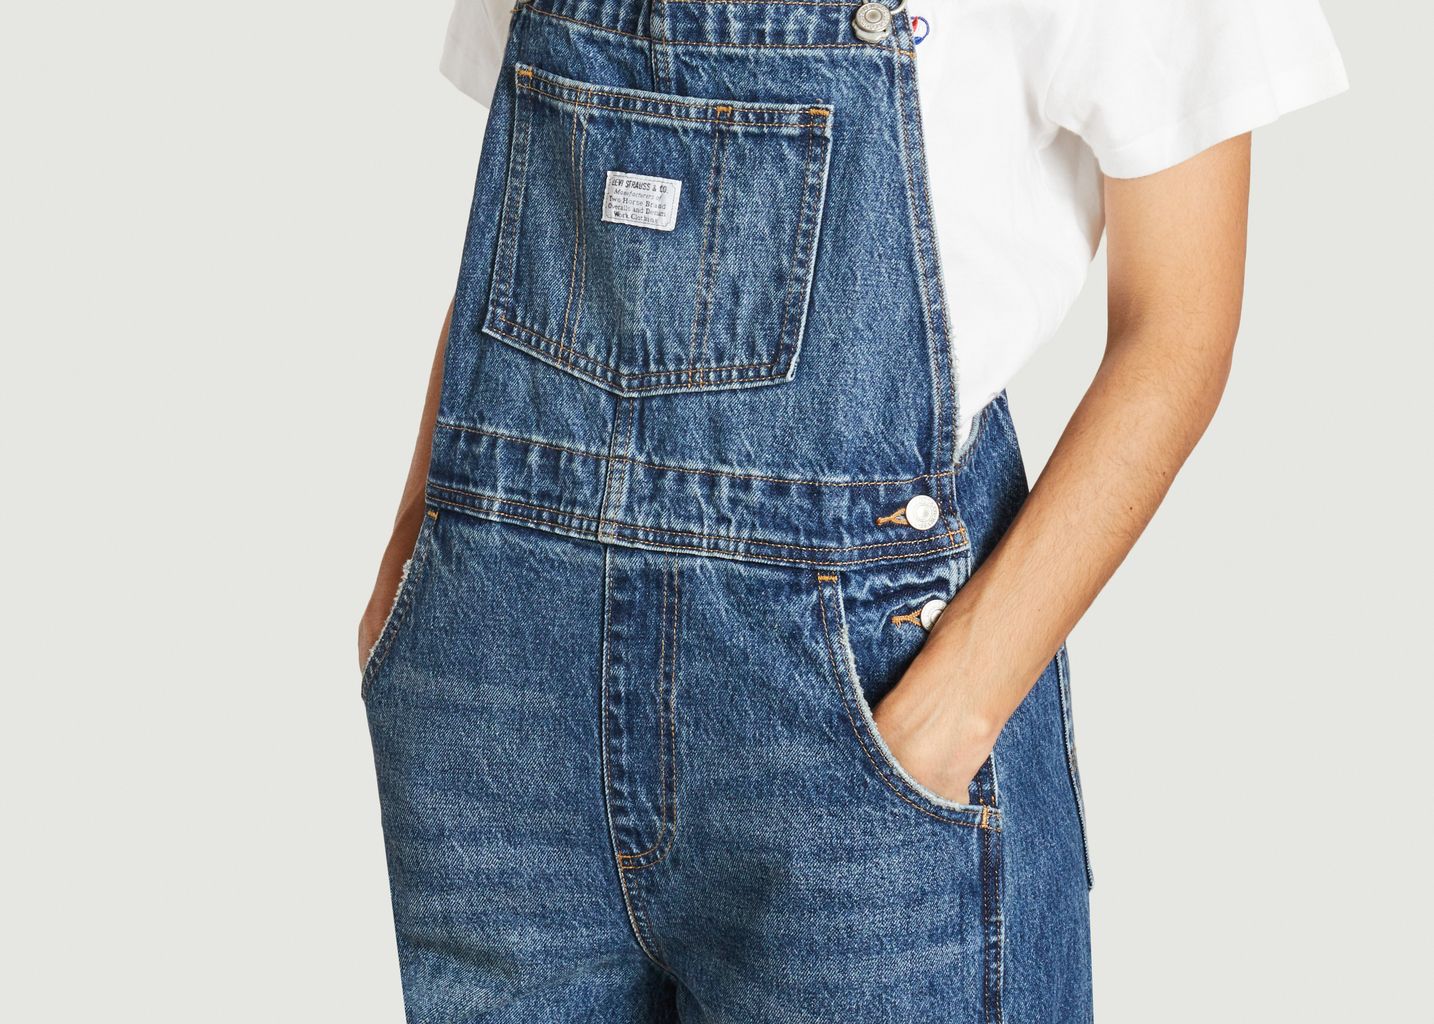 Salopette Vintage Overall  - Levi's Red Tab